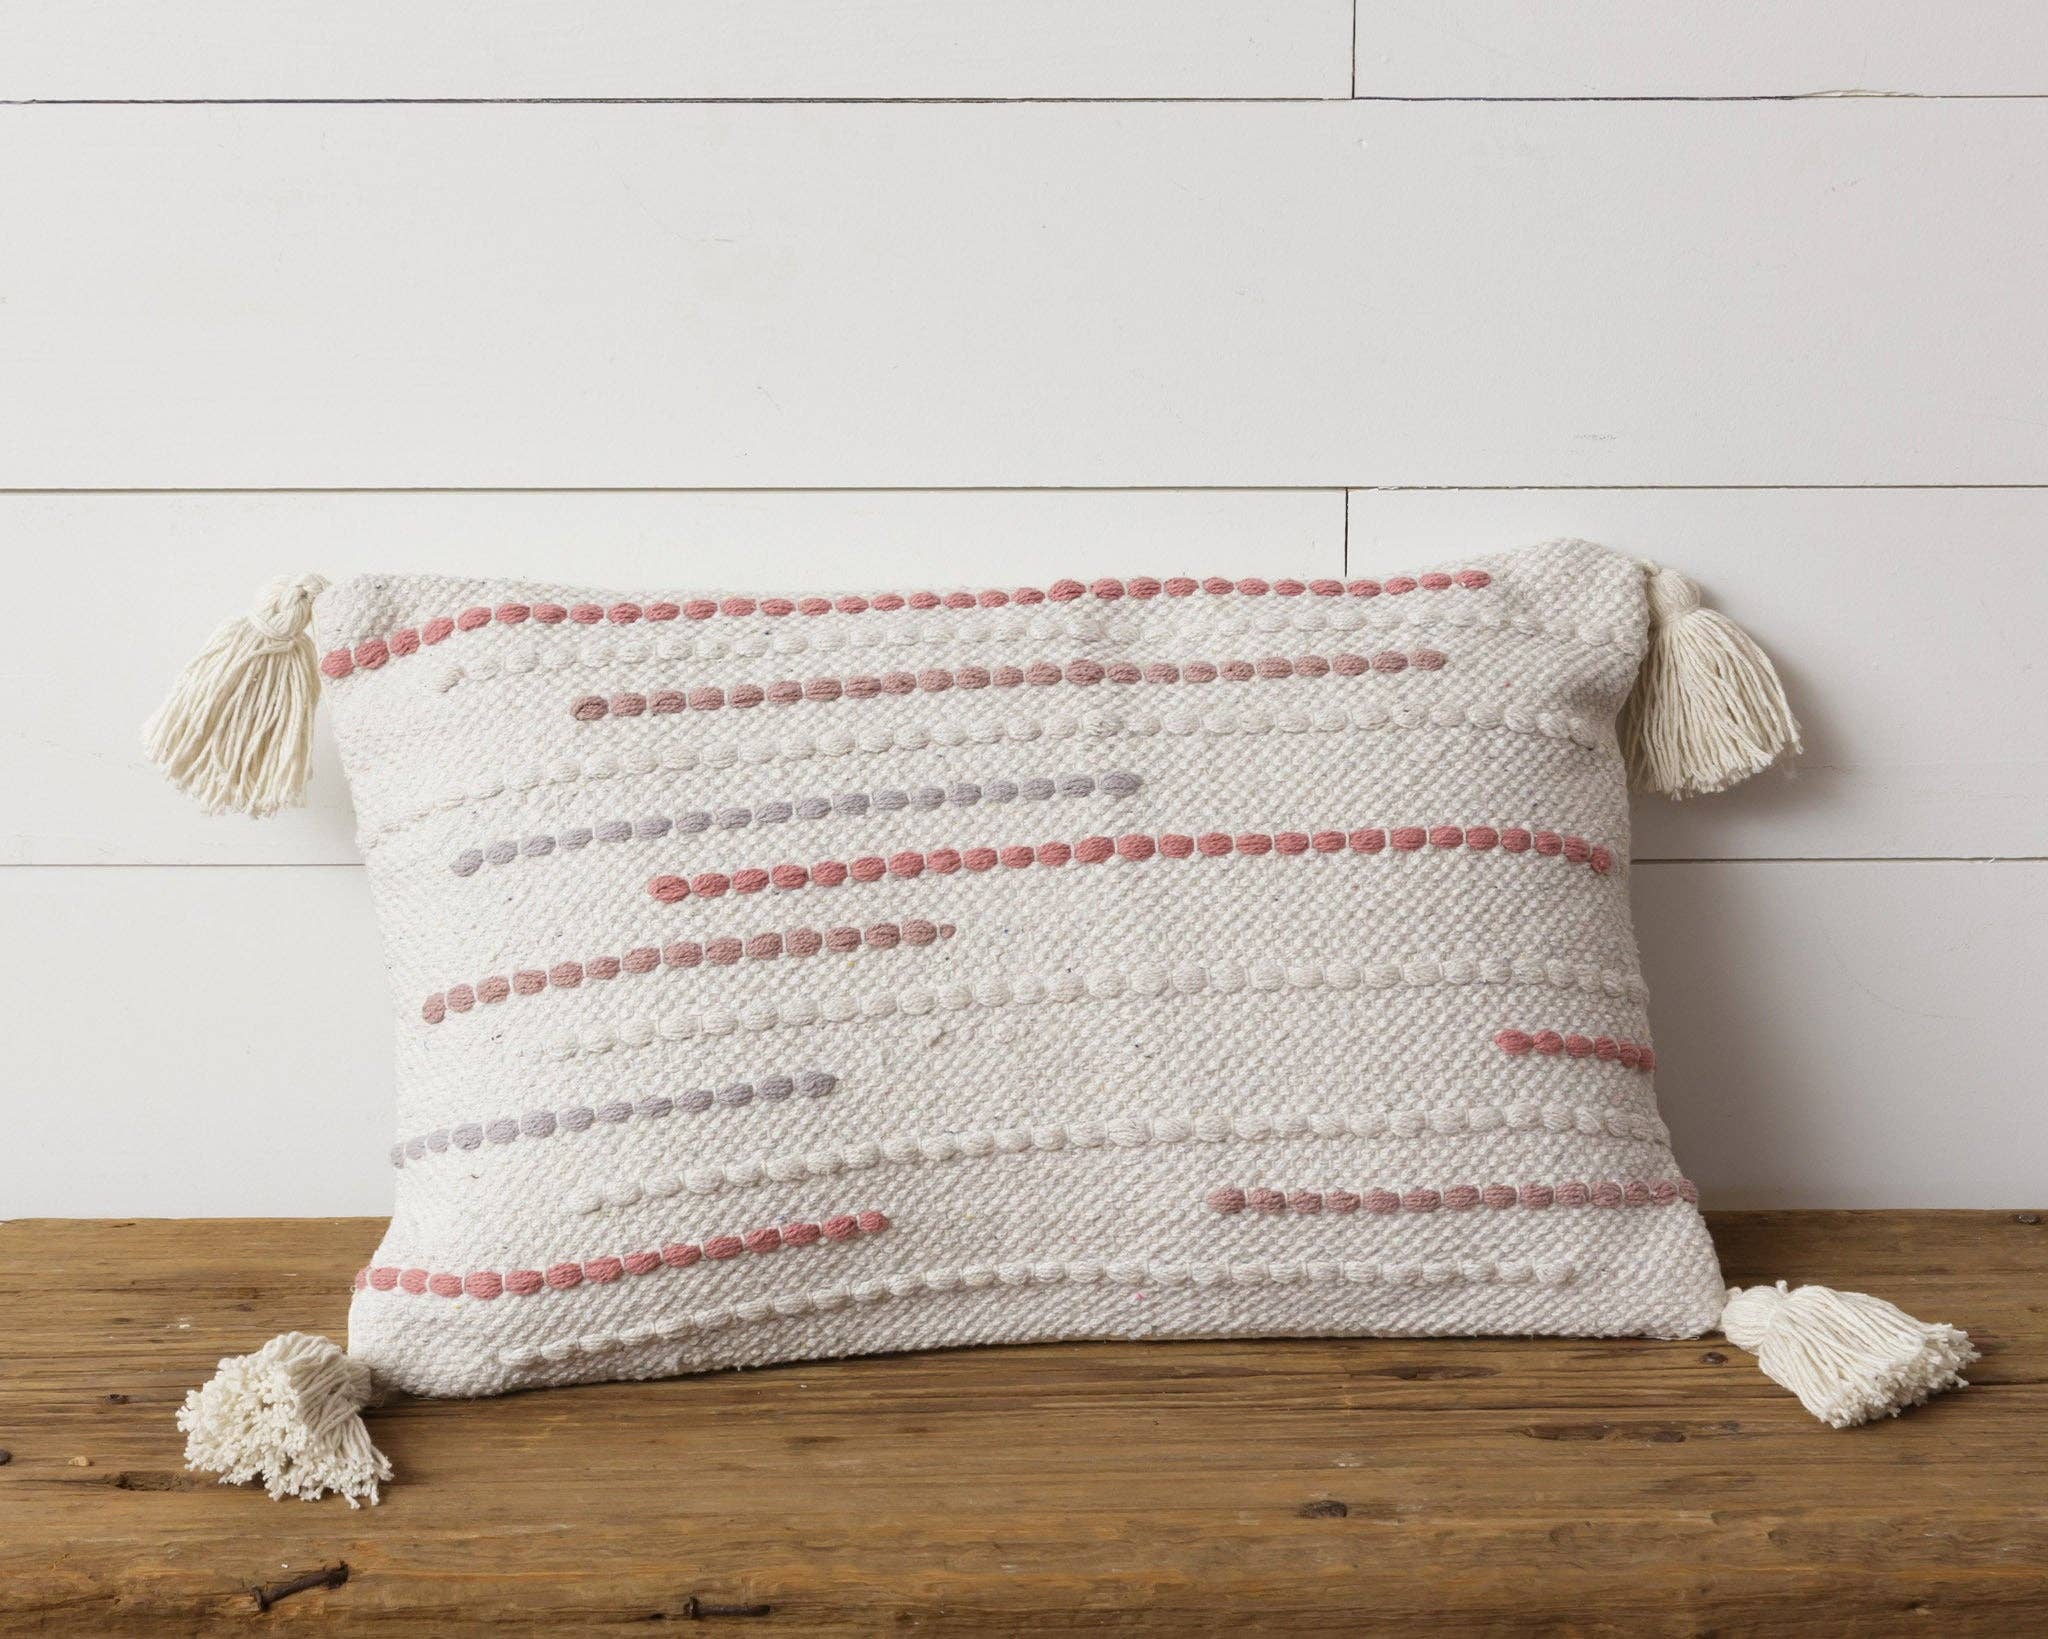 Blush with Tassels Pillow